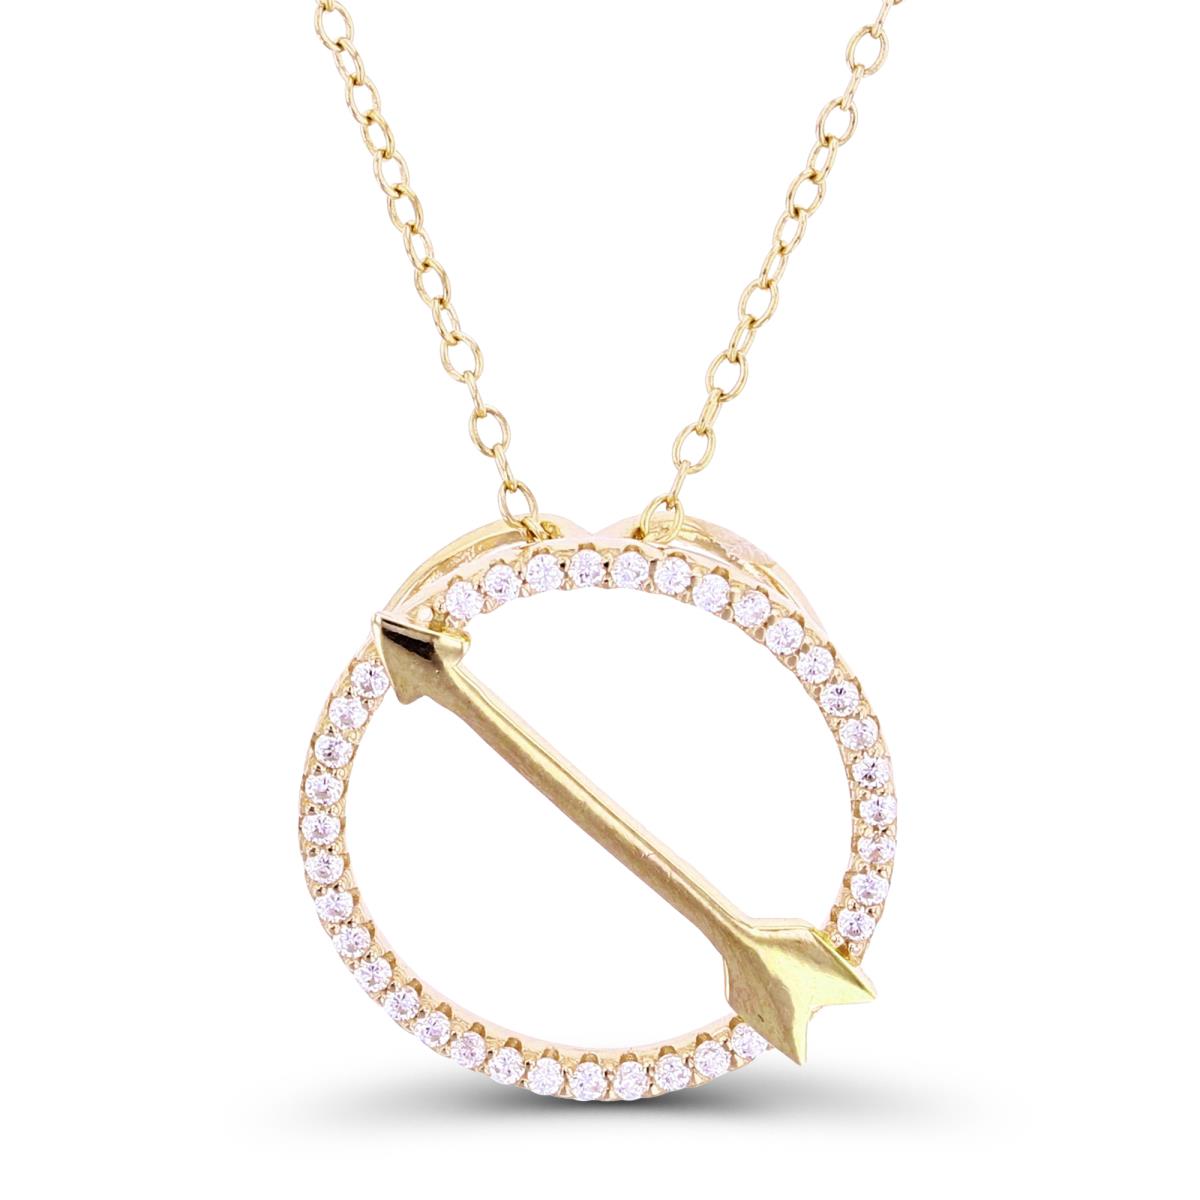 Sterling Silver+1Micron Yellow Gold Rnd White CZ Open Circle with Metal Arrow 18"Necklace